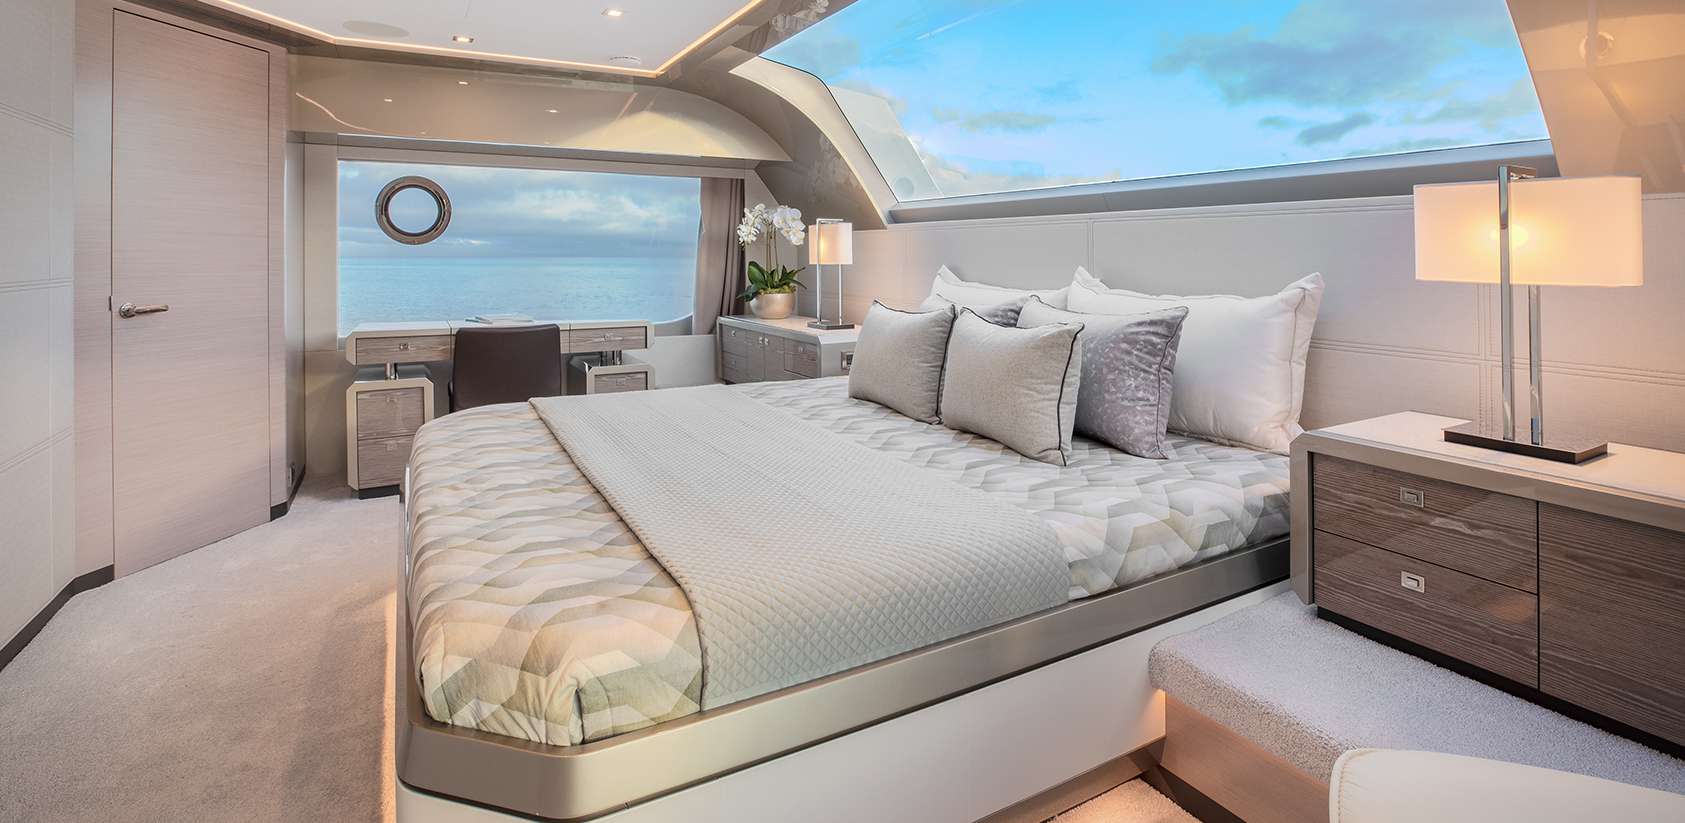 ALMOST DONE - Superyacht charter Grenada & Boat hire in Caribbean, Bahamas, Florida East Coast, Cuba, Dominican Republic, Turks and Caicos, USA South East 6